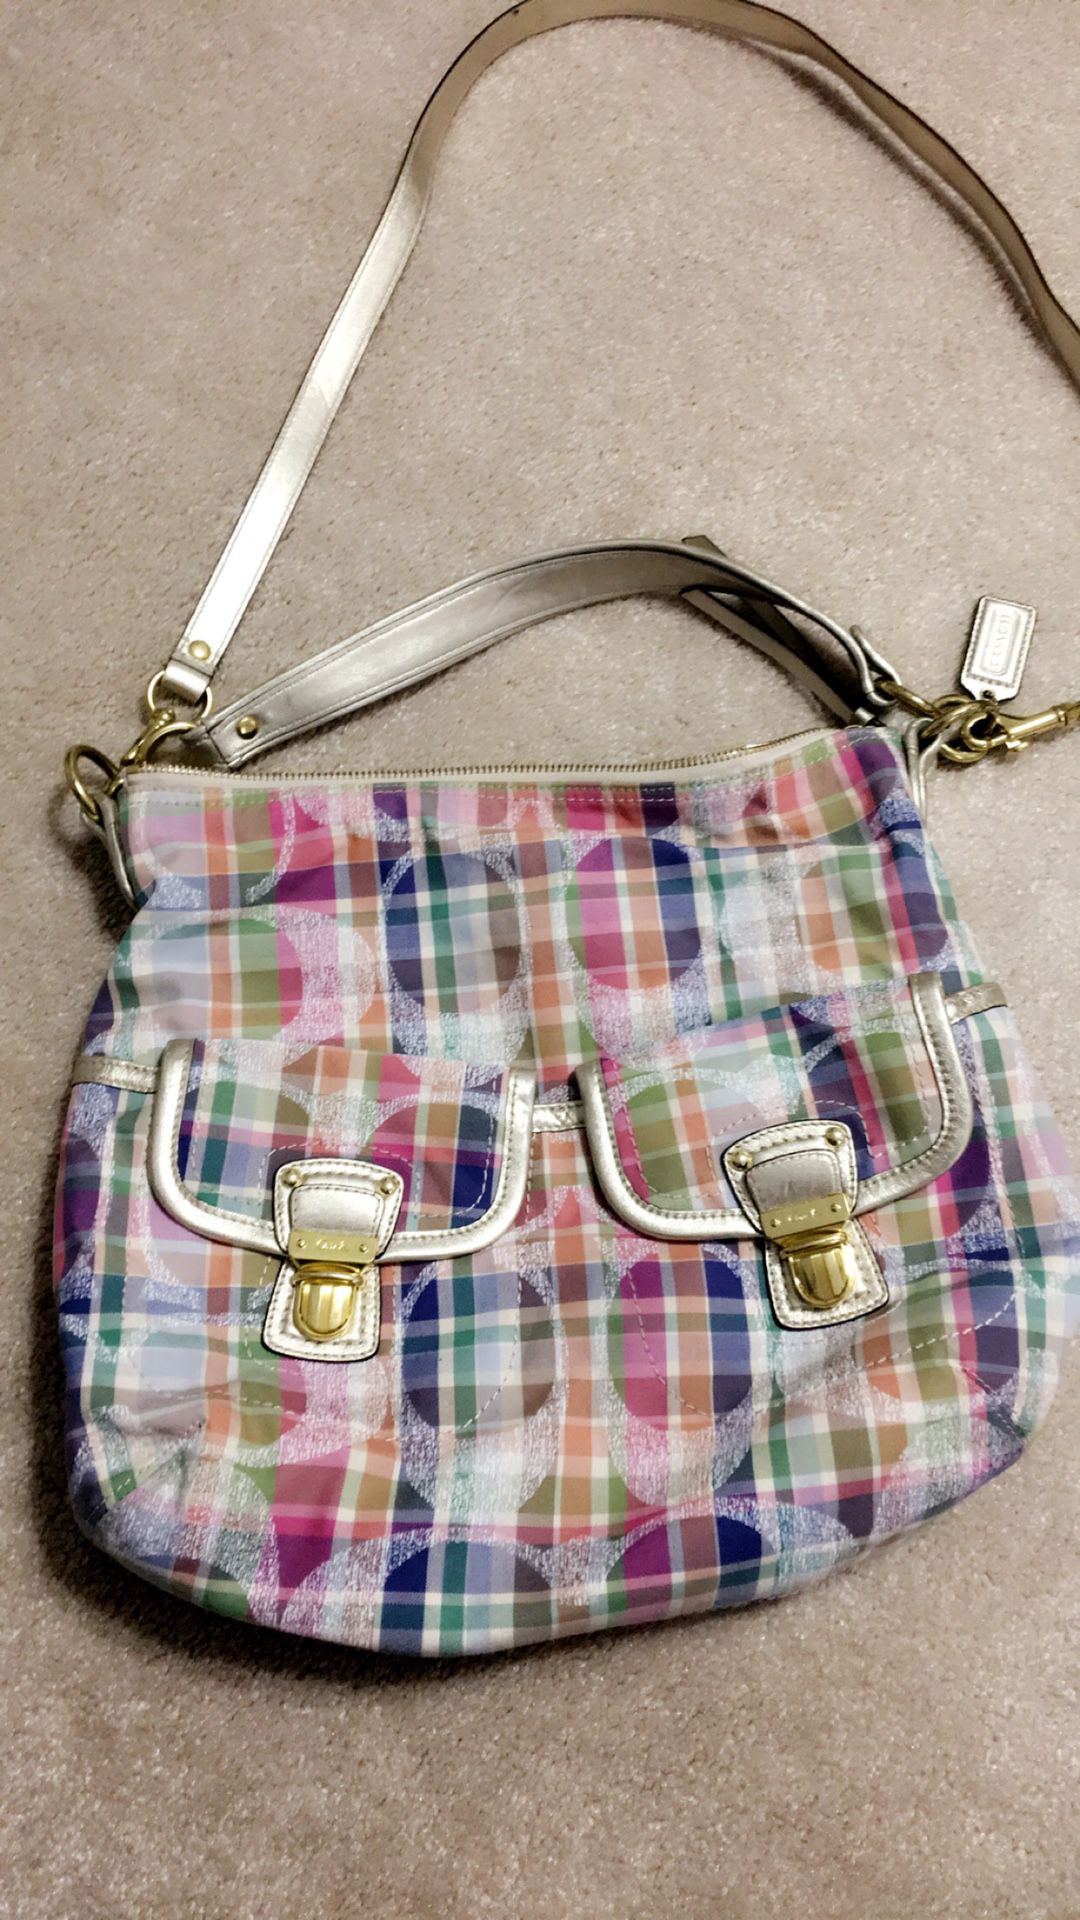 Coach bag with matching wallet